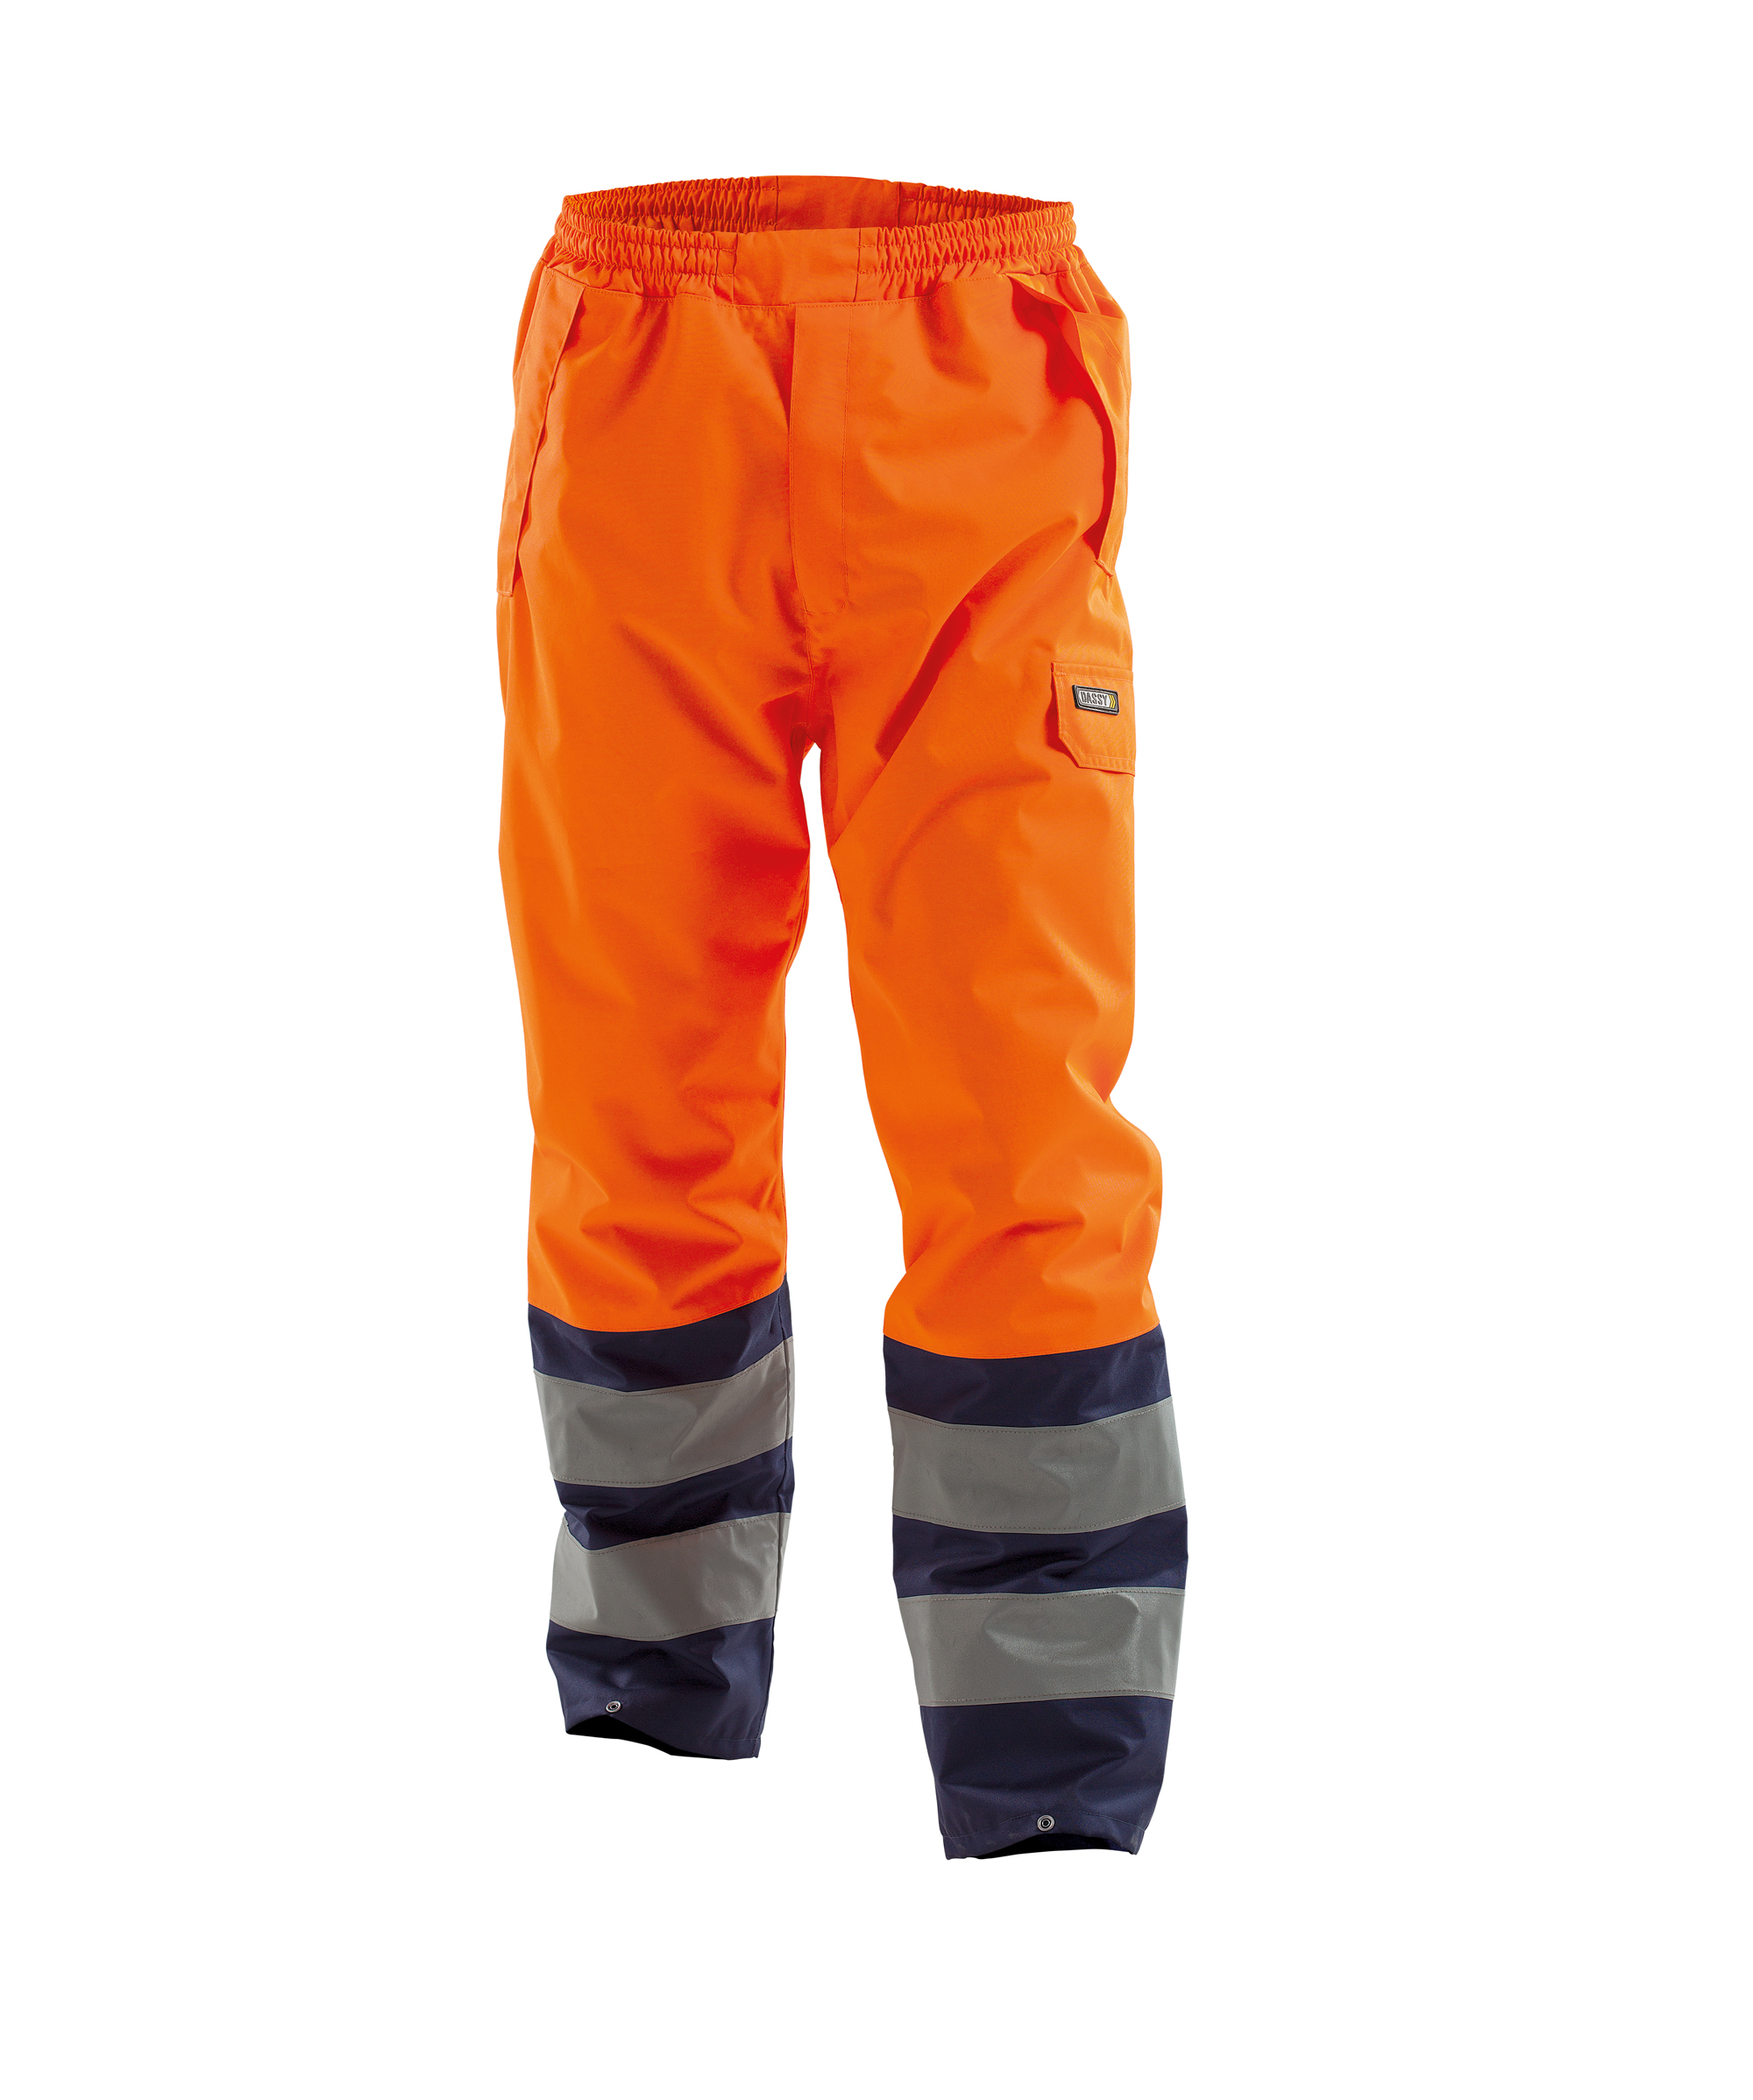 sola_high-visibility-waterproof-work-trousers_fluo-orange-navy_front.jpg